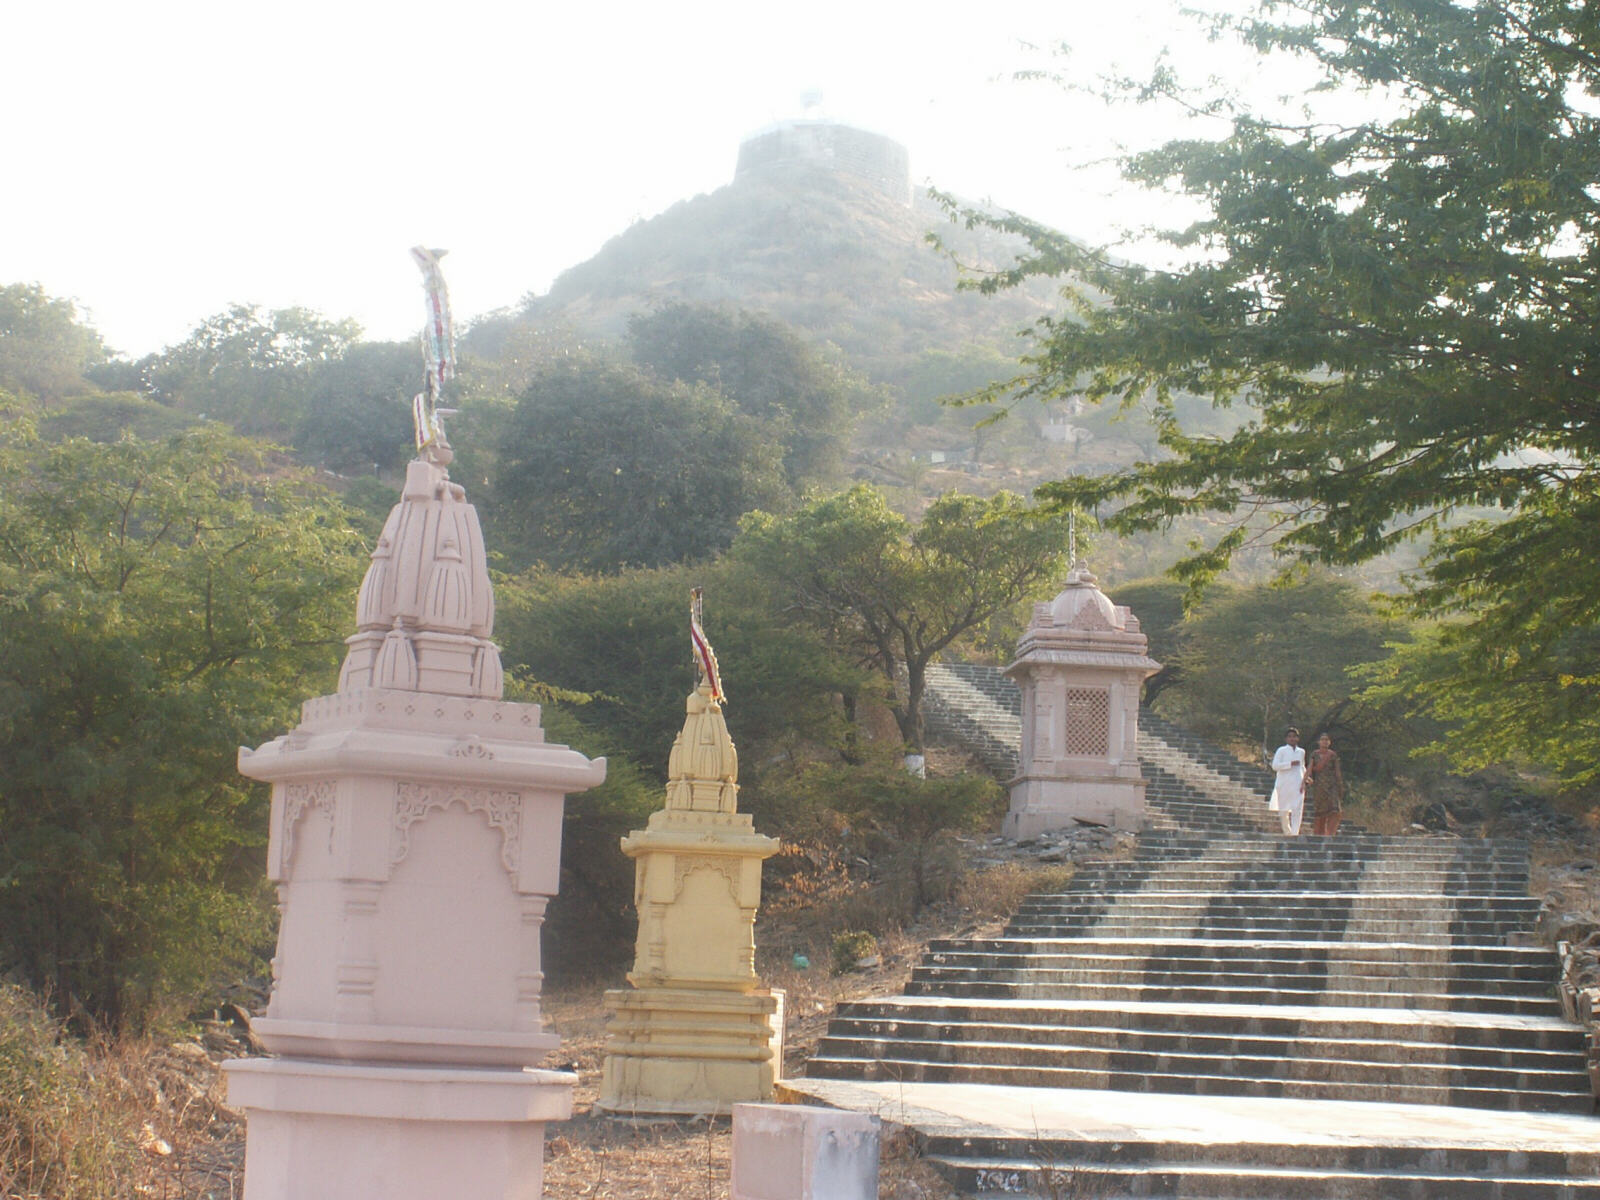 Steps up to the Shatrunjaya temples in Gujerat, India